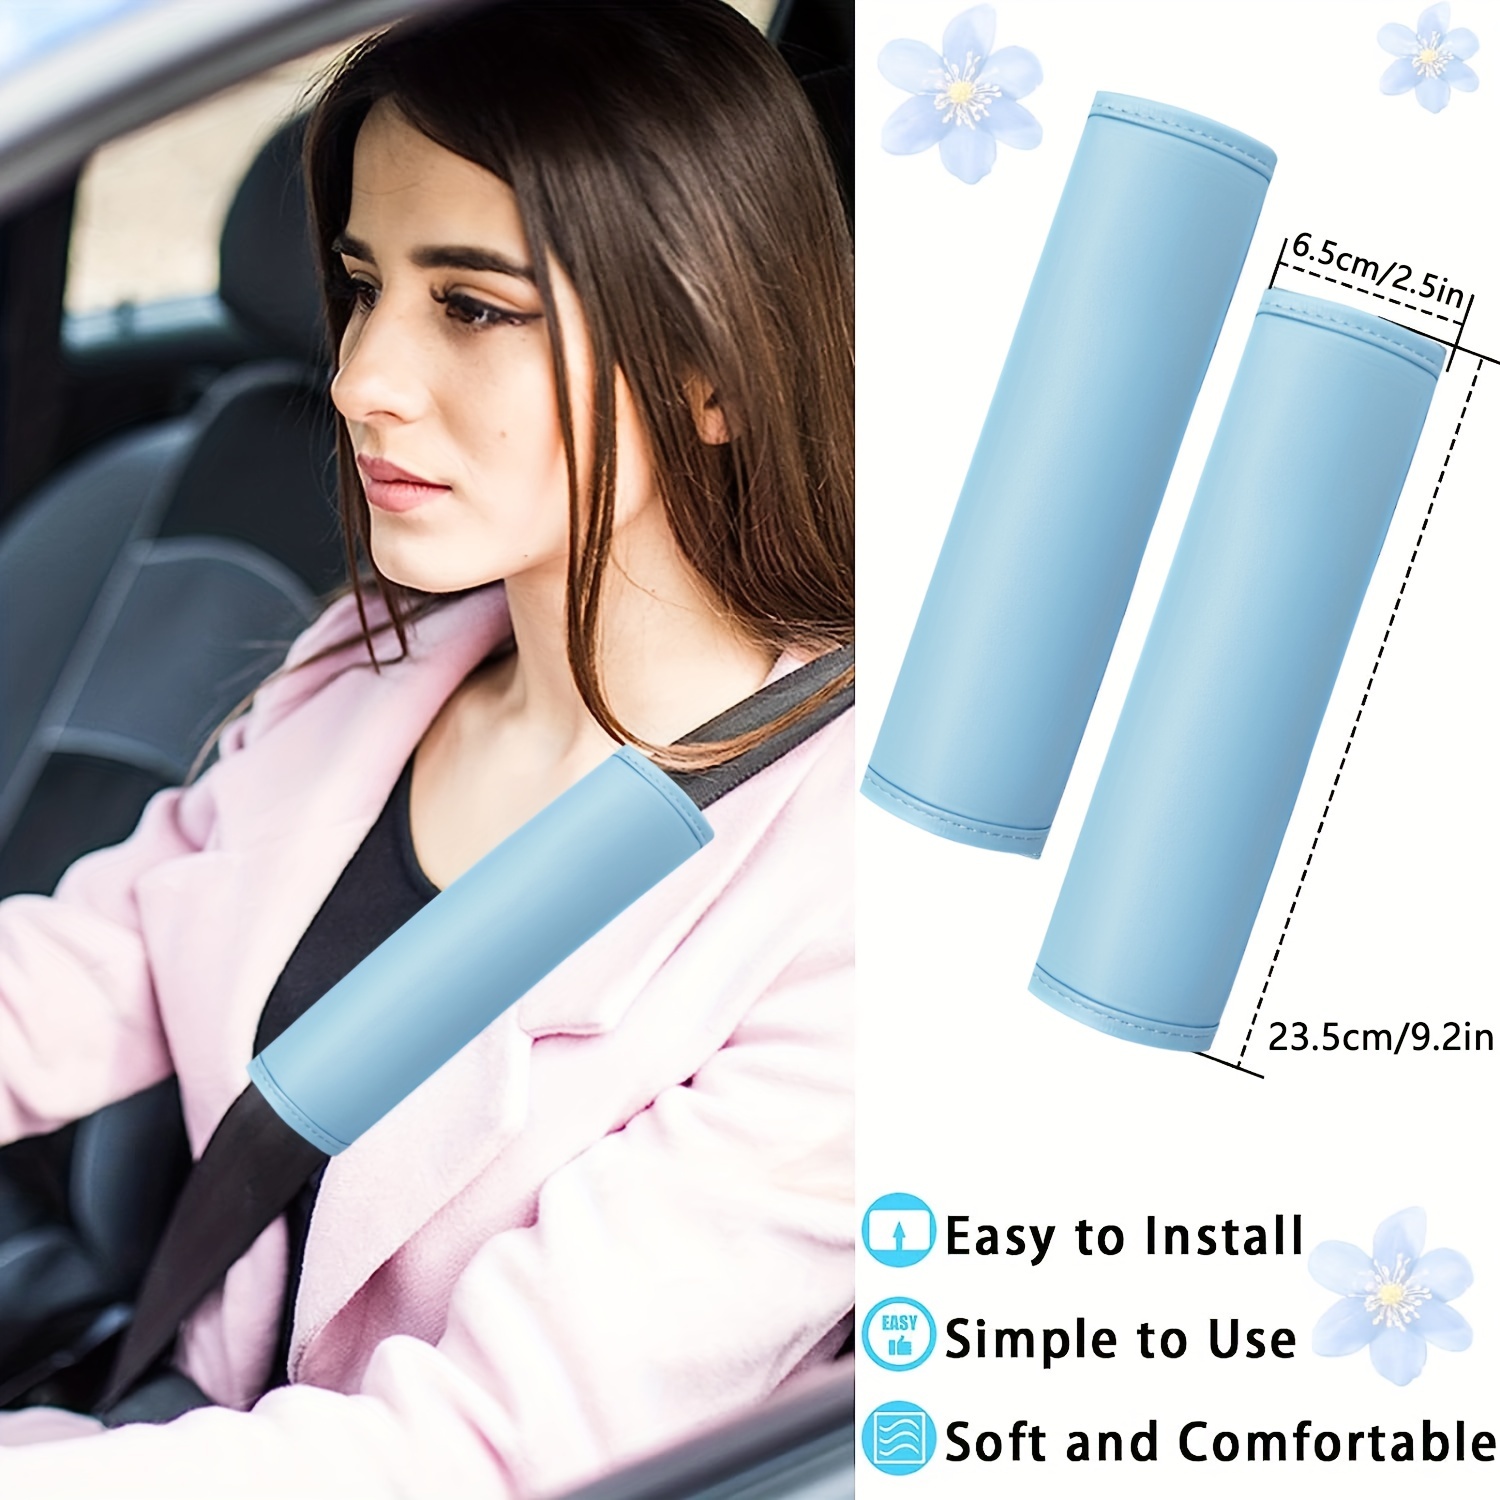 10pcs Blue Leather Steering Wheel Cover Set - For Women - Cute Car  Accessories Set With Seat Belt Covers, Bling Start Button Ring, Air Vent  Clips